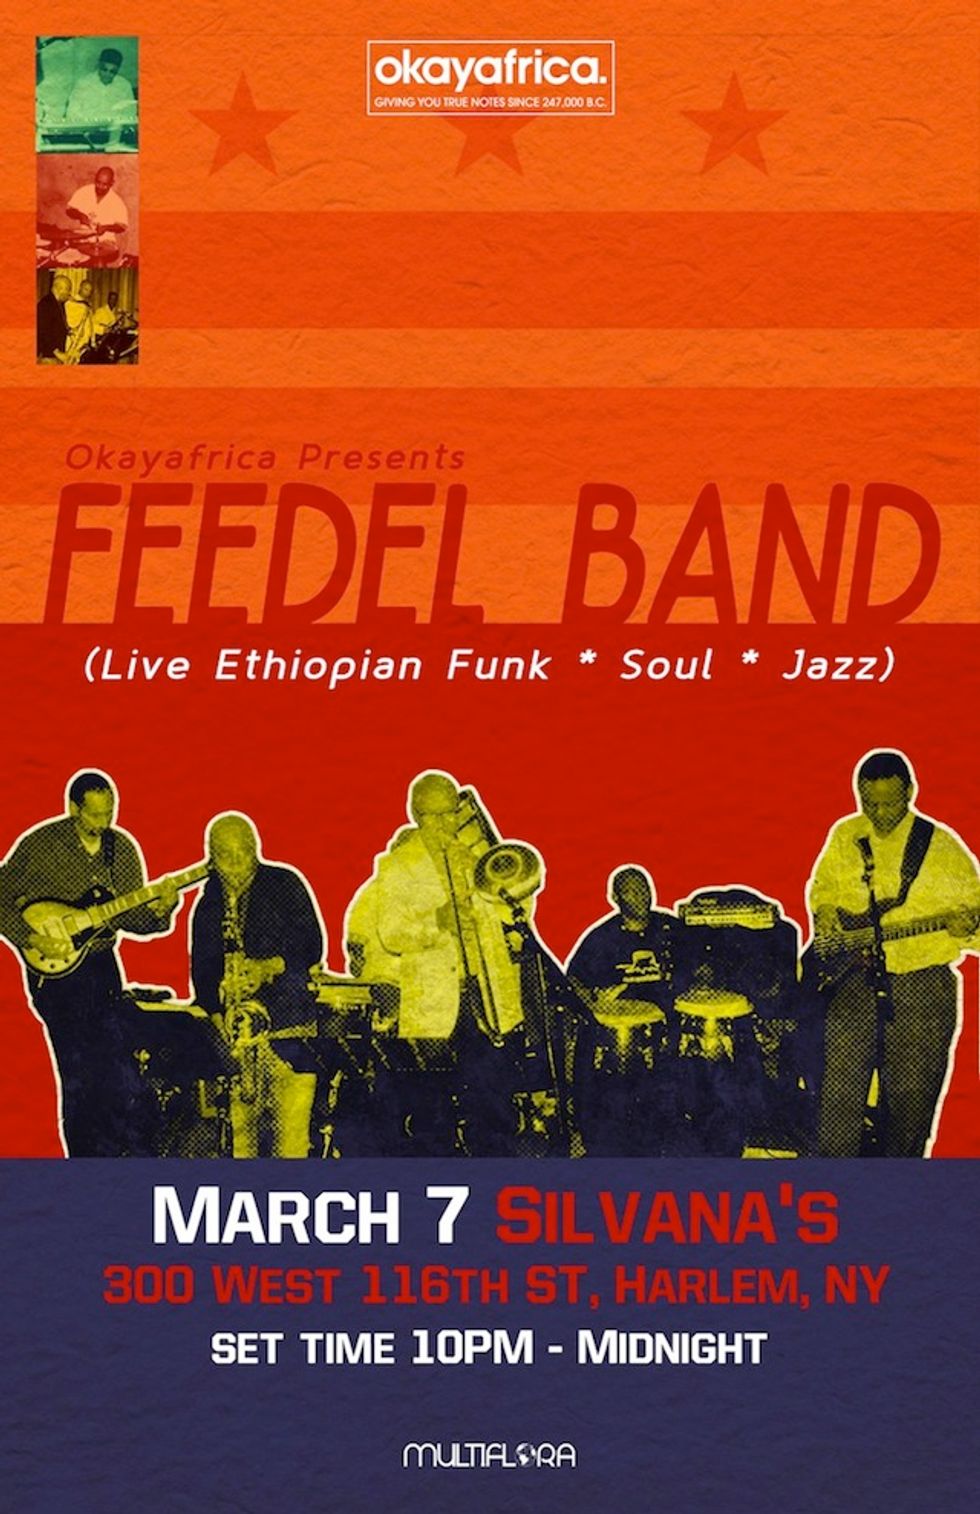 Feedel Band's Ethiopian Funk Live In Harlem This Friday